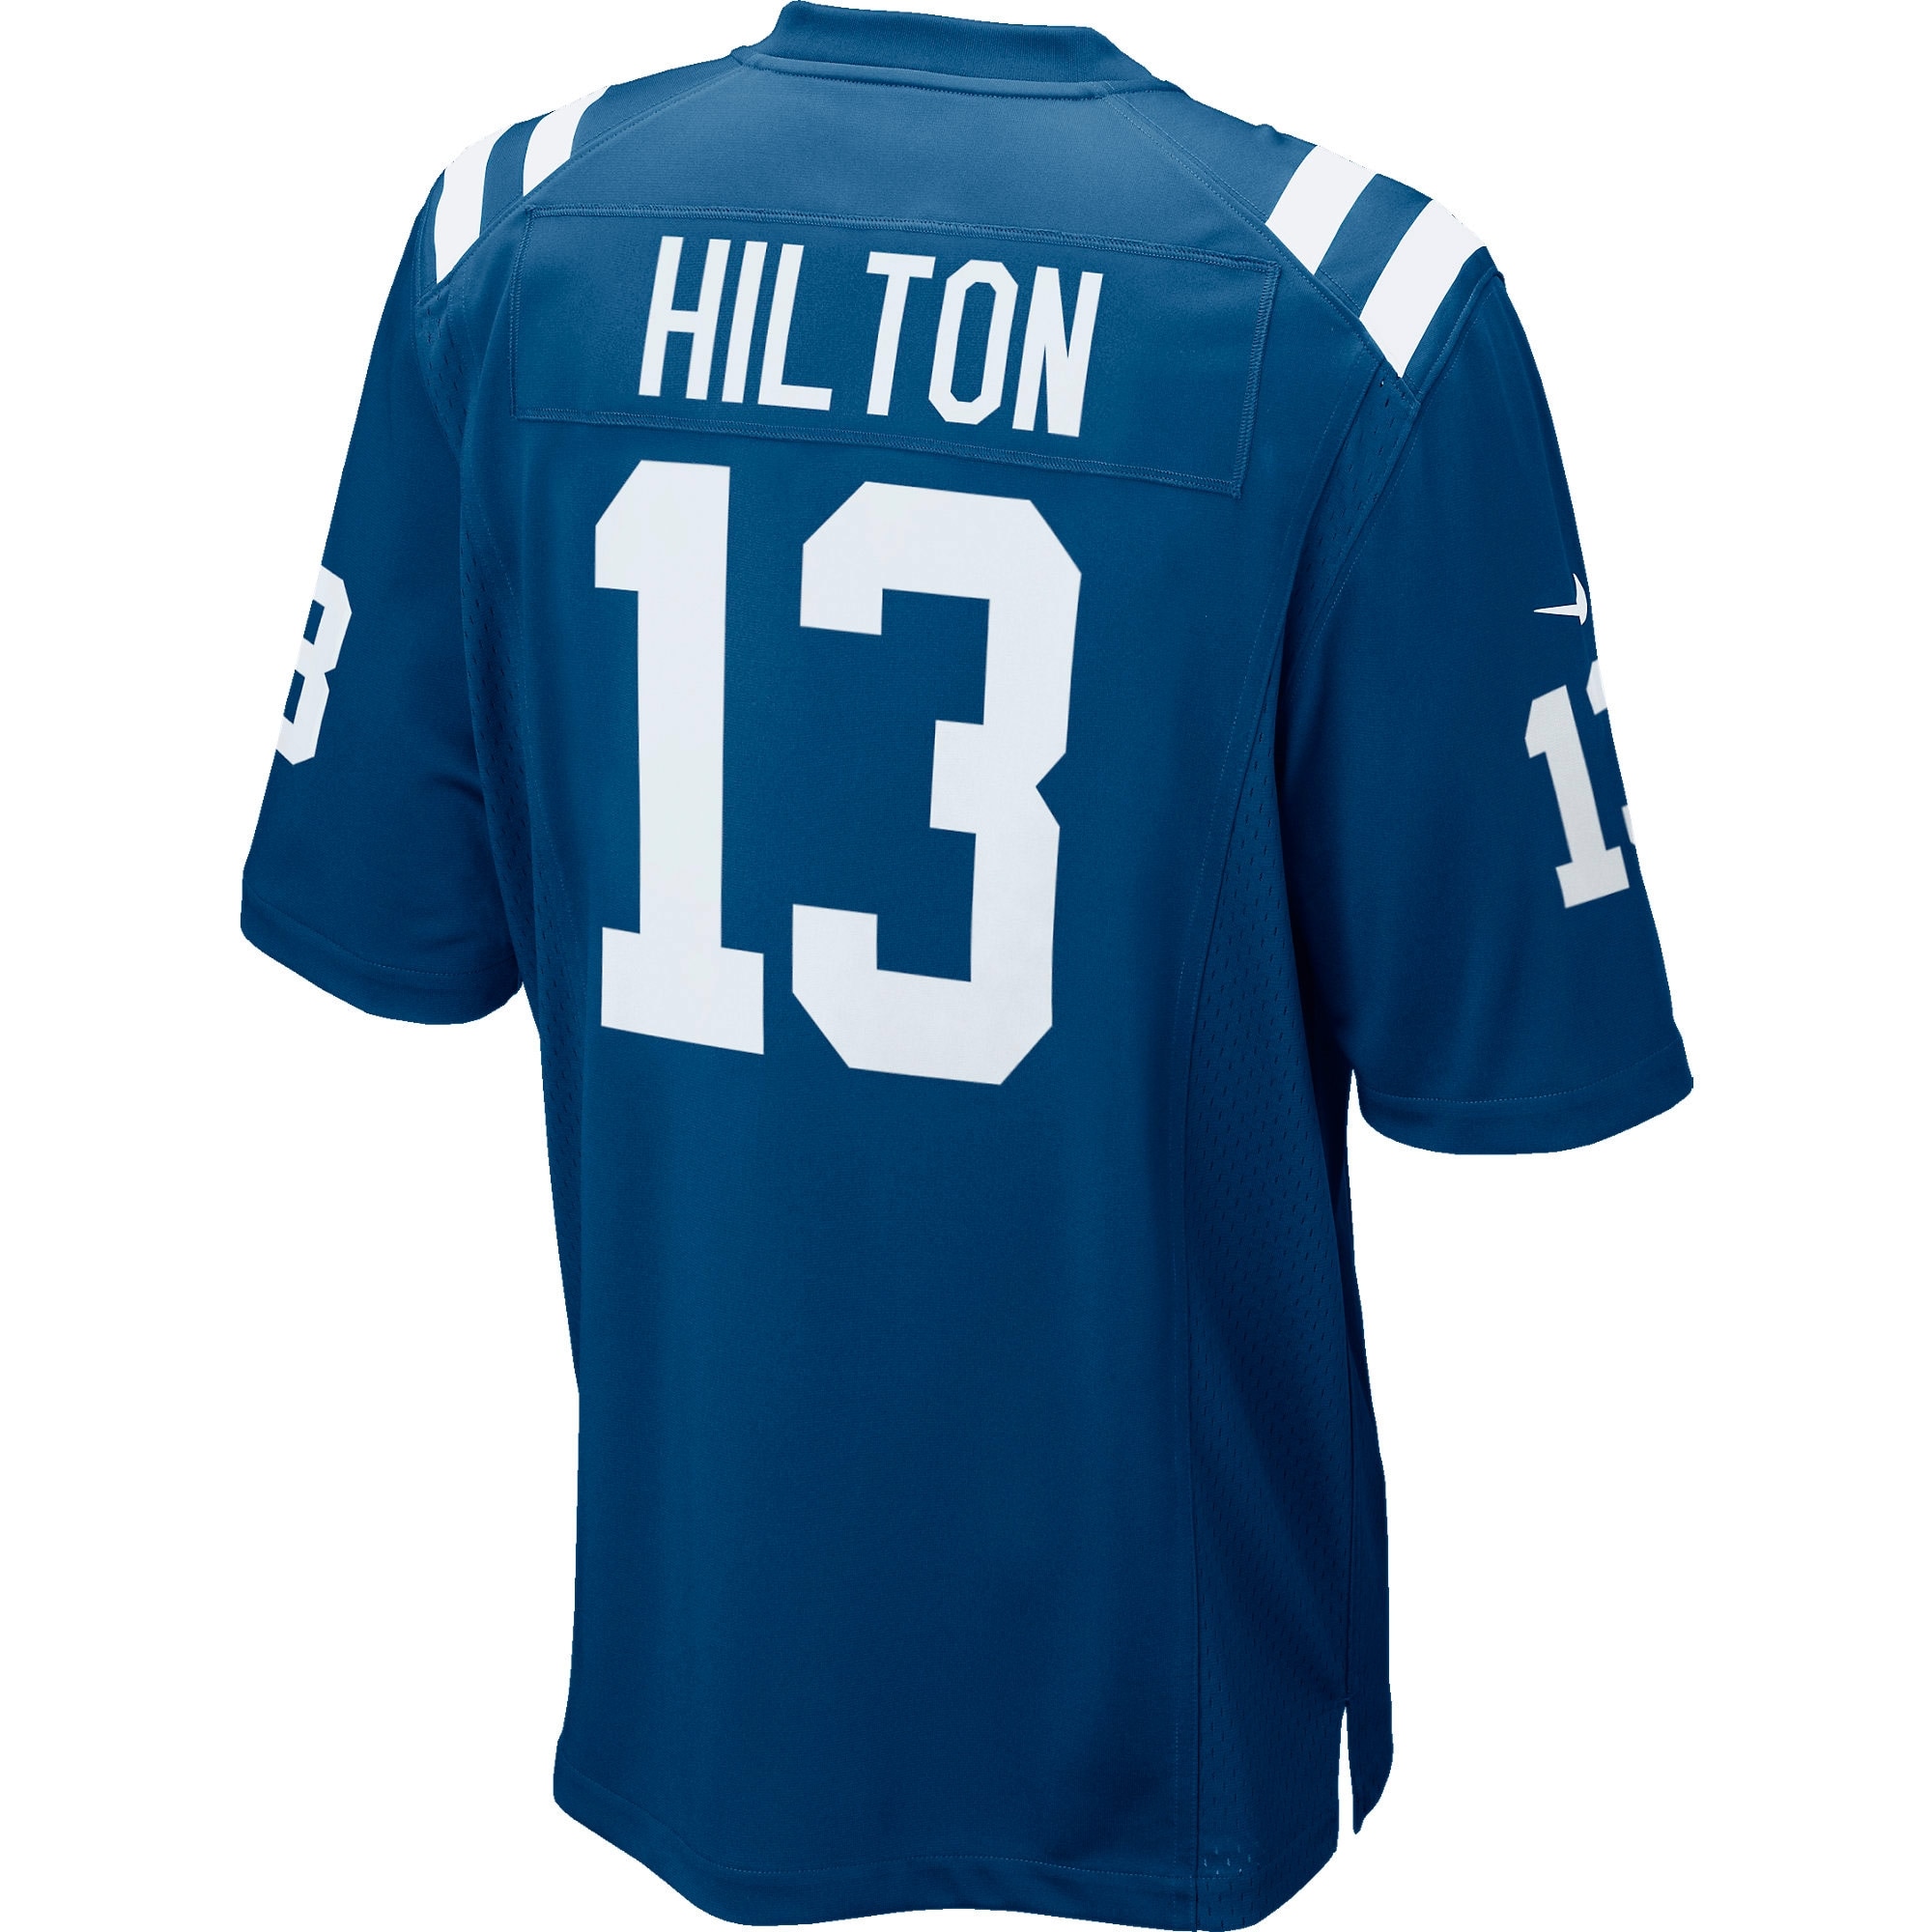 Men's Indianapolis Colts Jerseys Royal Blue T.Y. Hilton Game Style